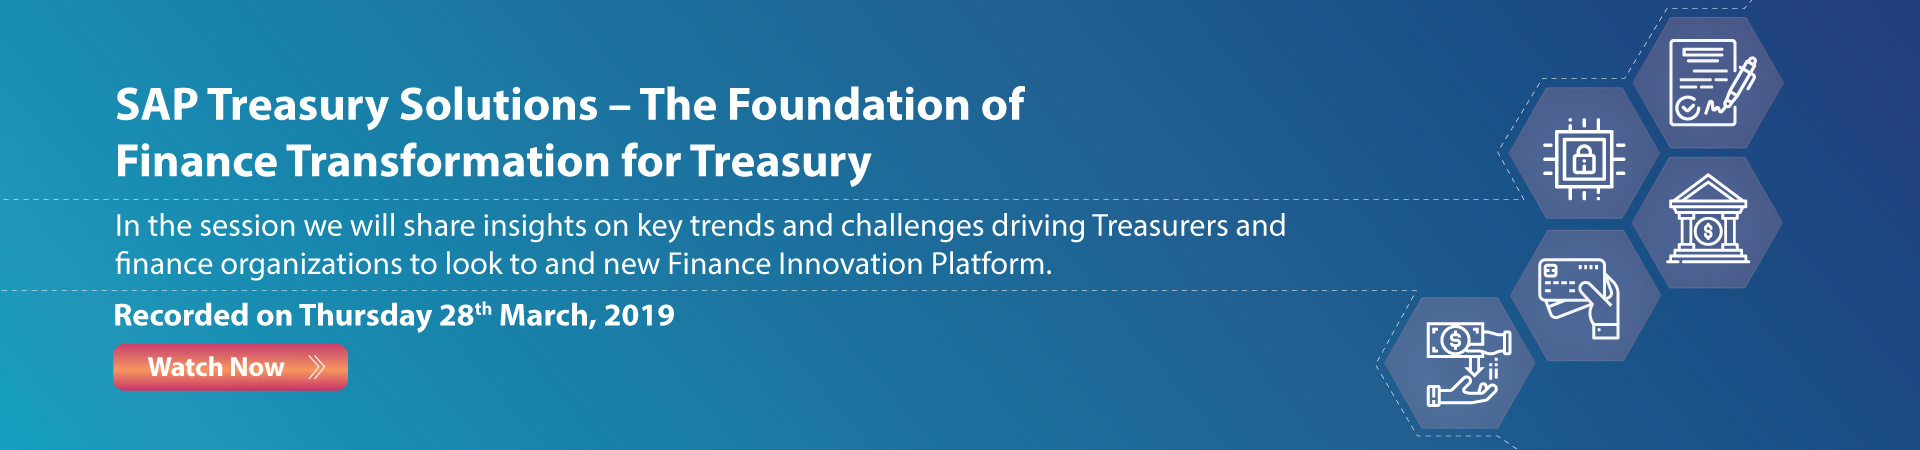 SAP Treasury Solutions – The Foundation of Finance Transformation for Treasury